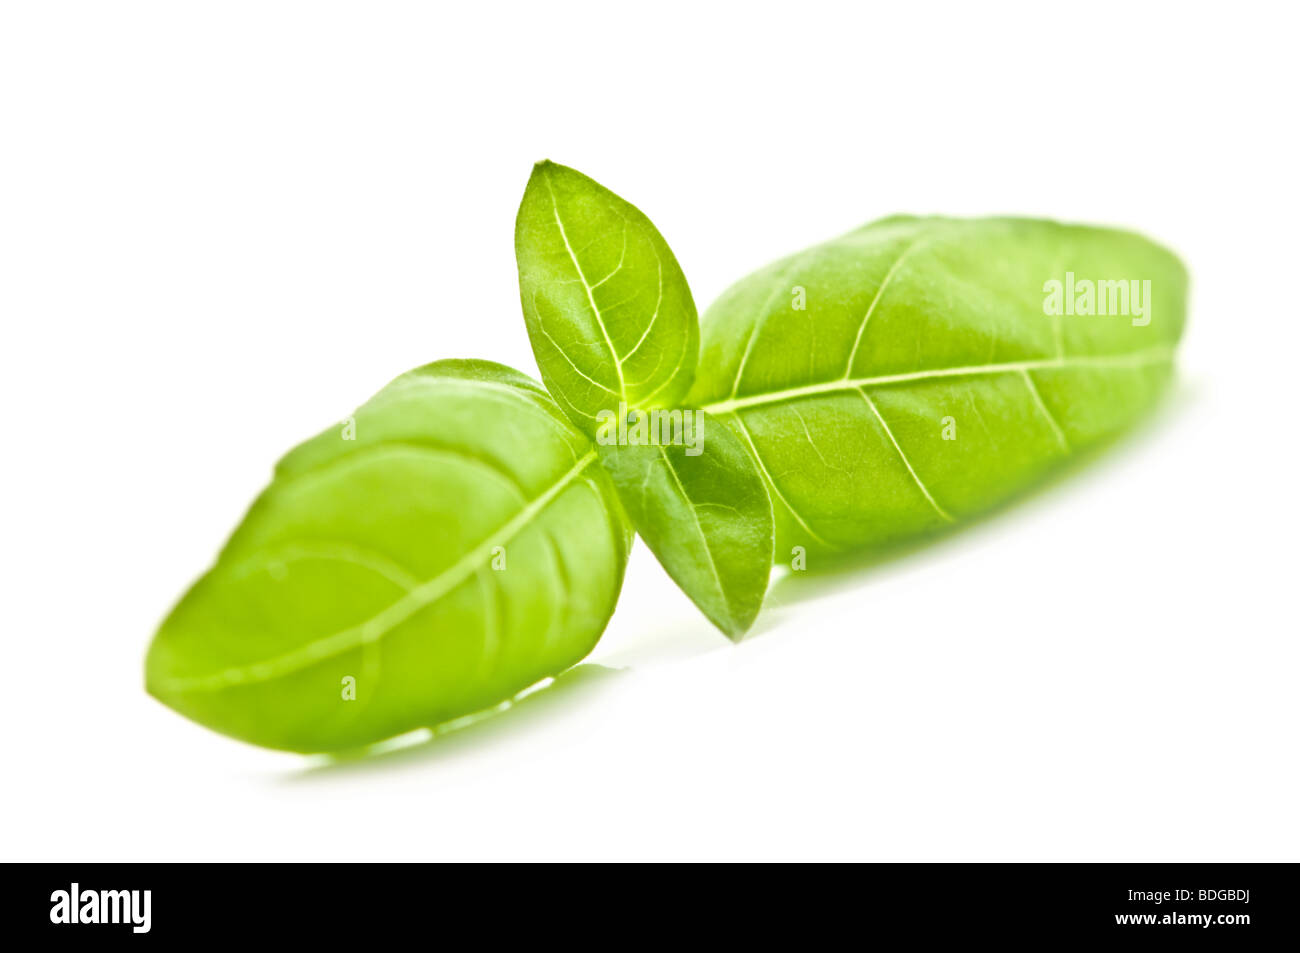 Basil leaf isolated on white Banque D'Images